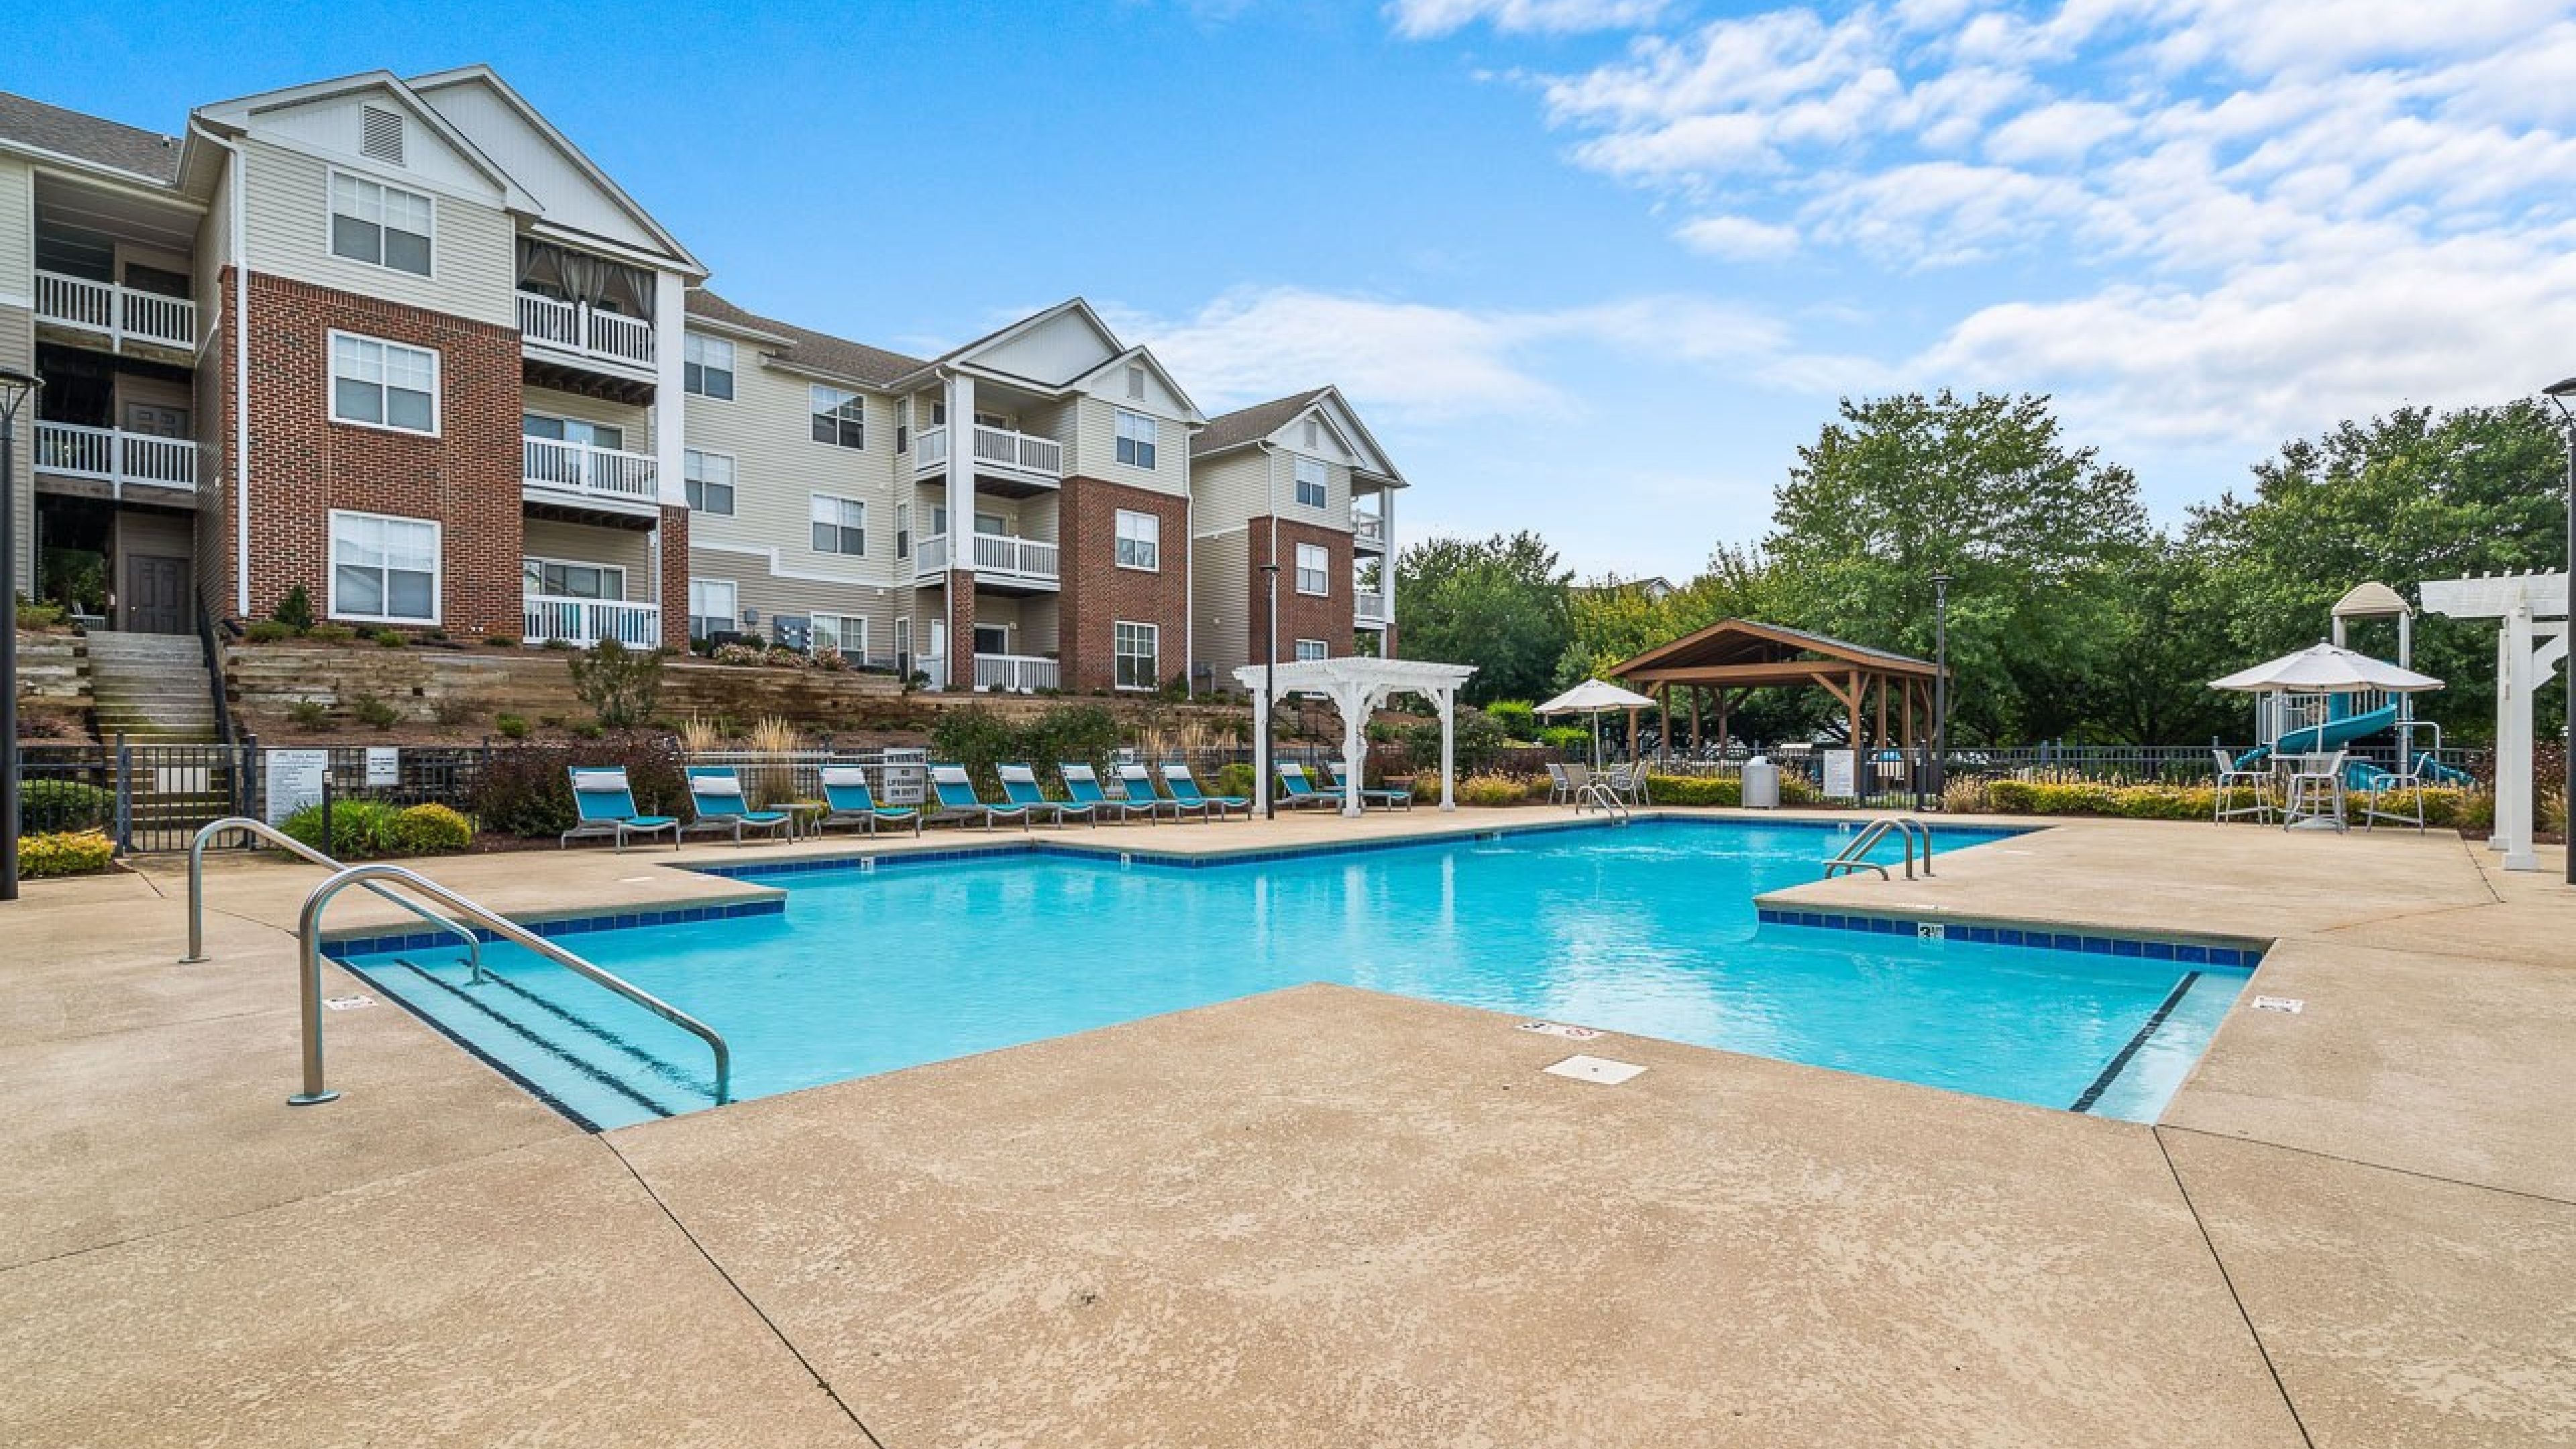 Hawthorne at Main large outdoor pool with surrounding seating, umbrellas, and grilling area